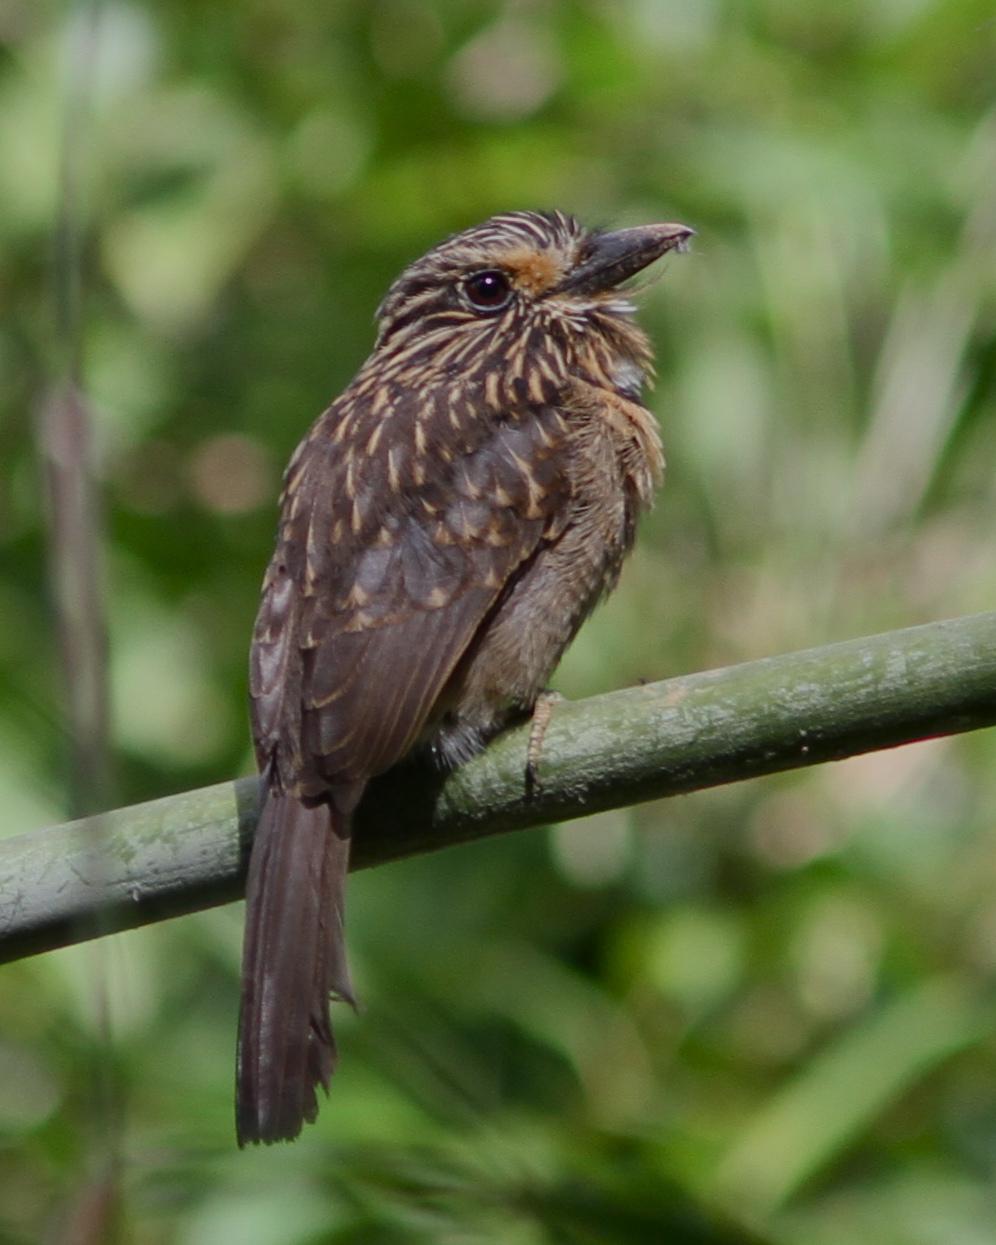 Crescent-chested Puffbird Photo by Marcelo Padua